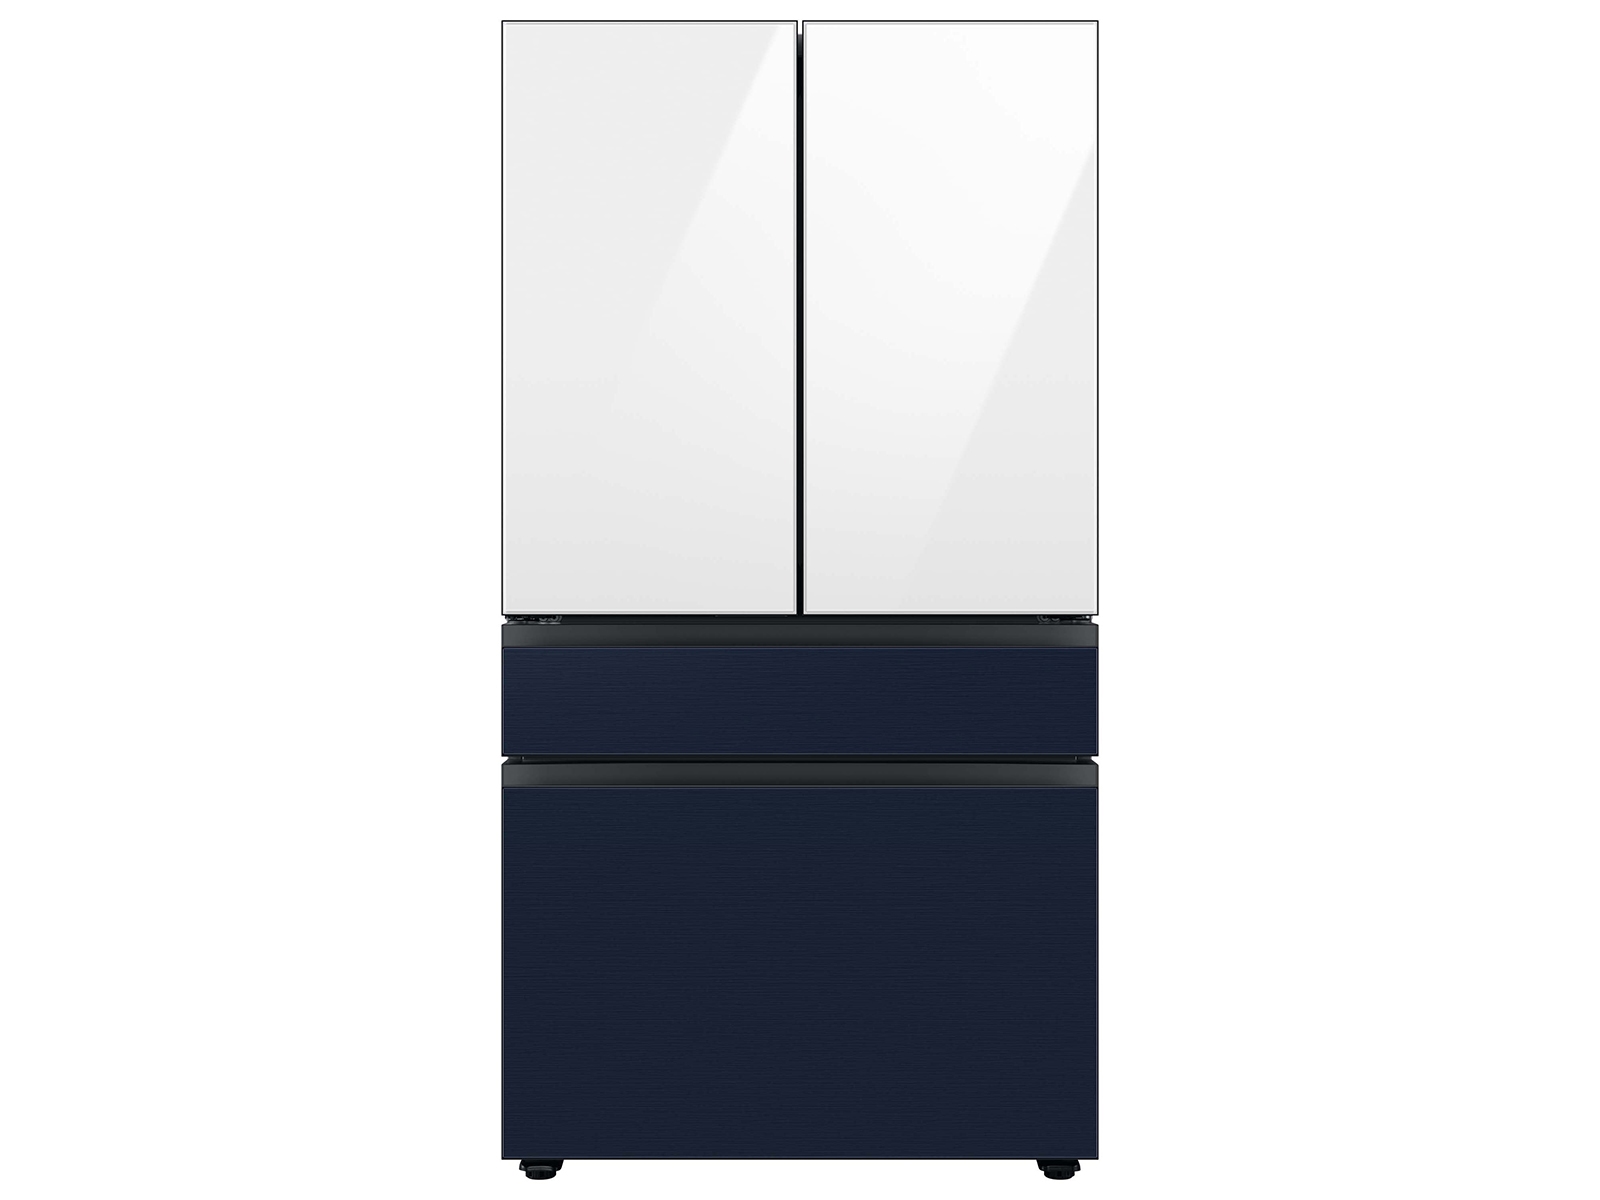 Bespoke 4-Door French Door Refrigerator (23 cu. ft.) with Customizable Door Panel Colors and Beverage Center™ in White Glass Top Panels with Navy Steel Middle and Bottom Panel